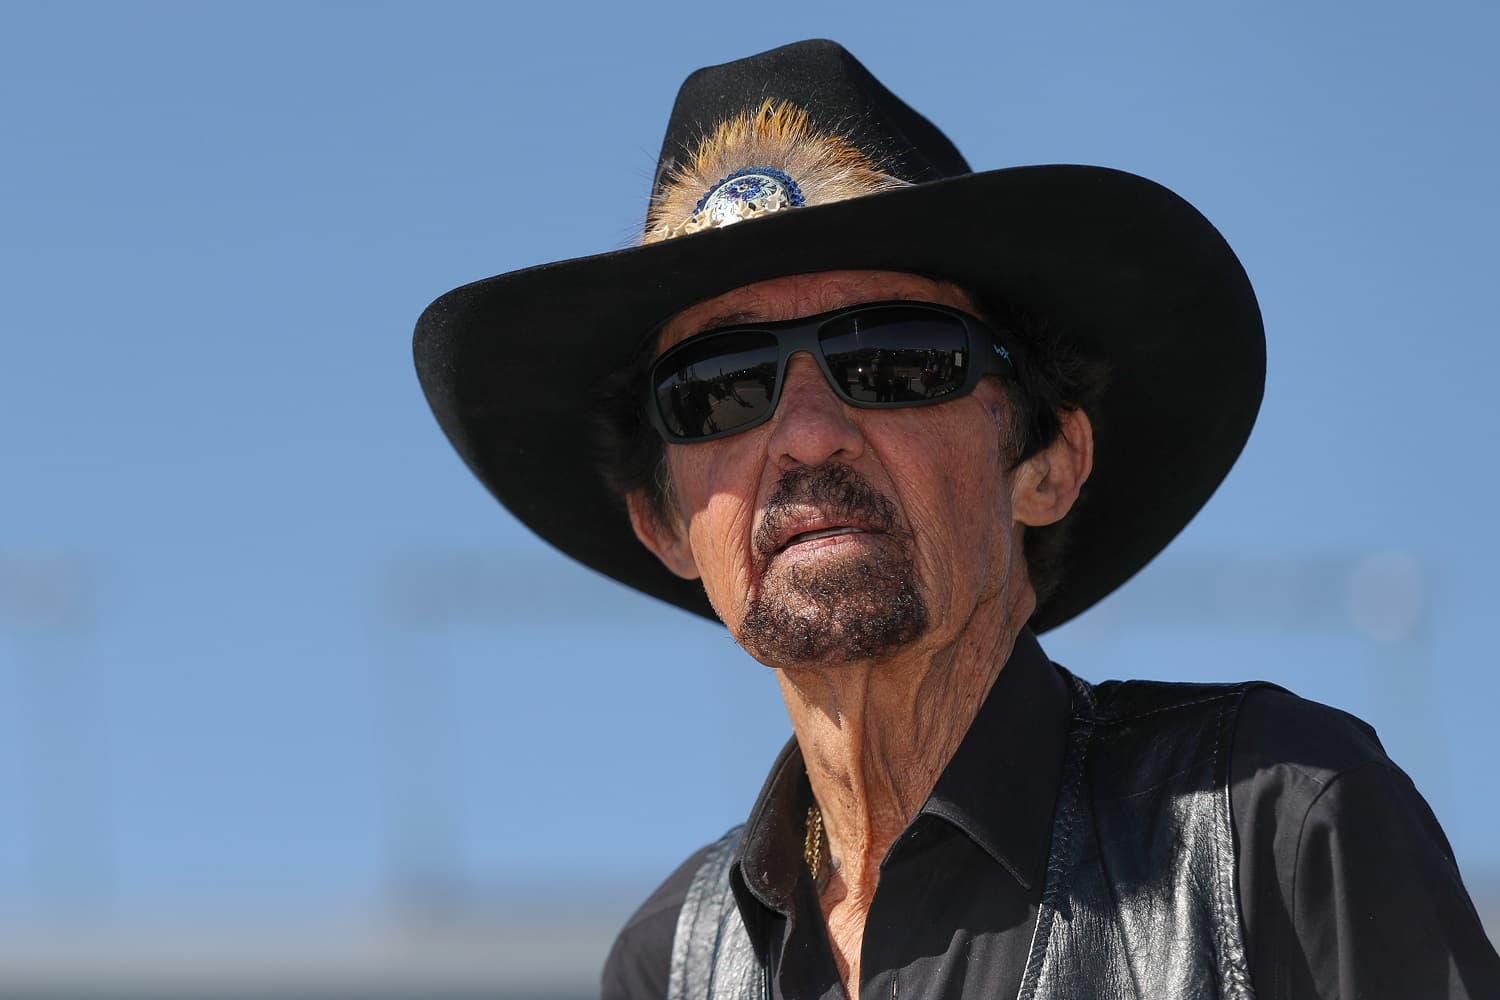 NASCAR Hall of Famer and GMS Motorsports owner Richard Petty looks on during practice for the Craftsman Truck Series Victoria's Voice Foundation 200 at Las Vegas Motor Speedway on March 3, 2023. | Meg Oliphant/Getty Images